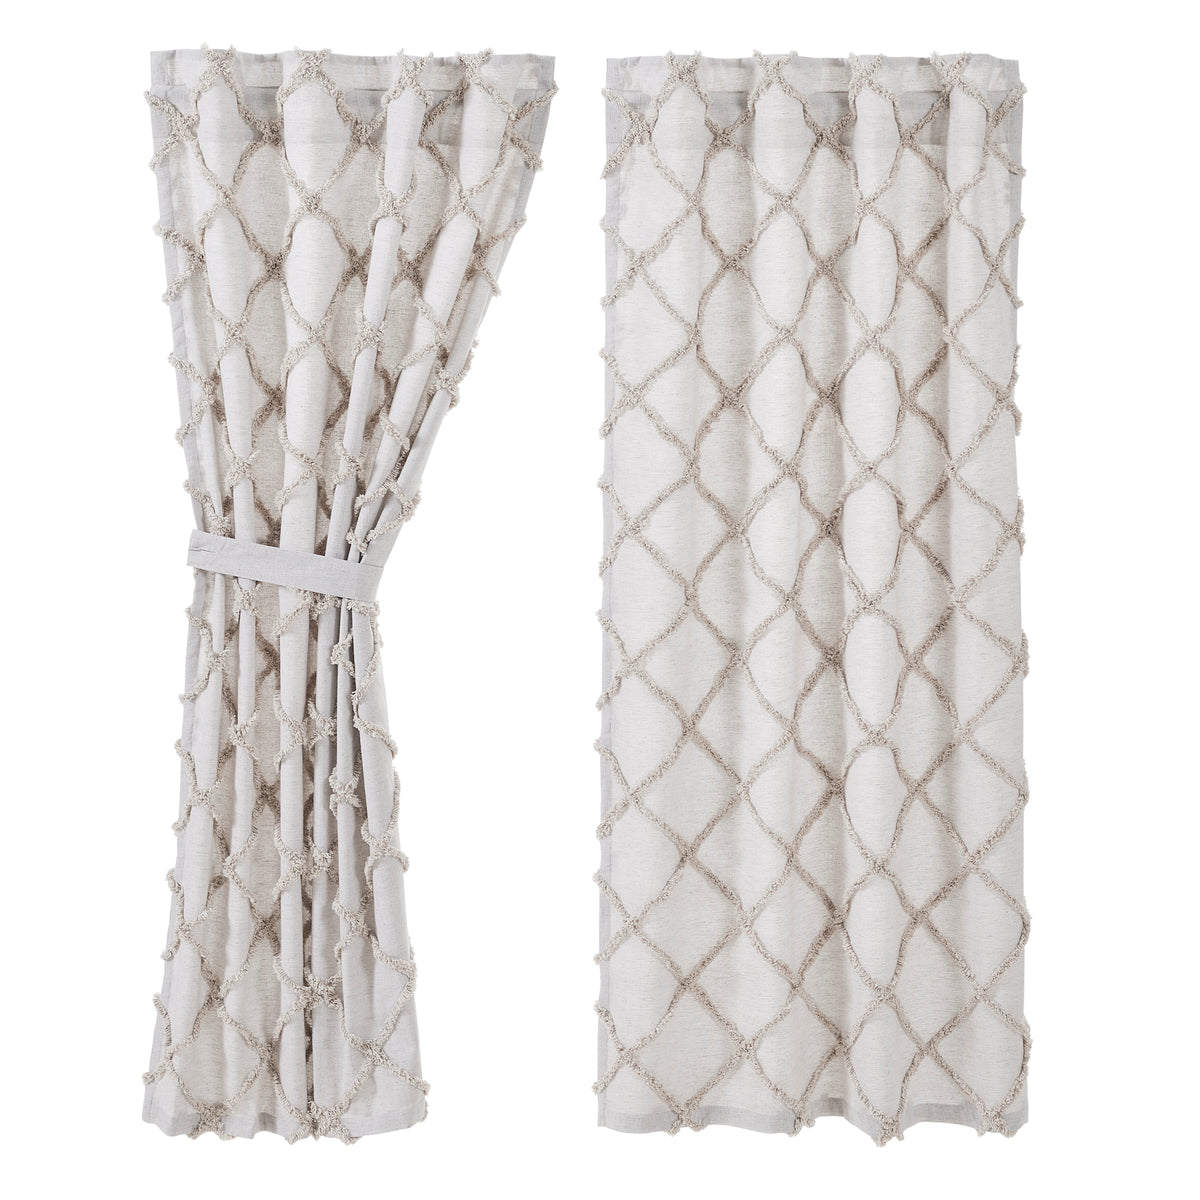 April & Olive Frayed Lattice Oatmeal Short Panel Set of 2 63x36 By VHC Brands